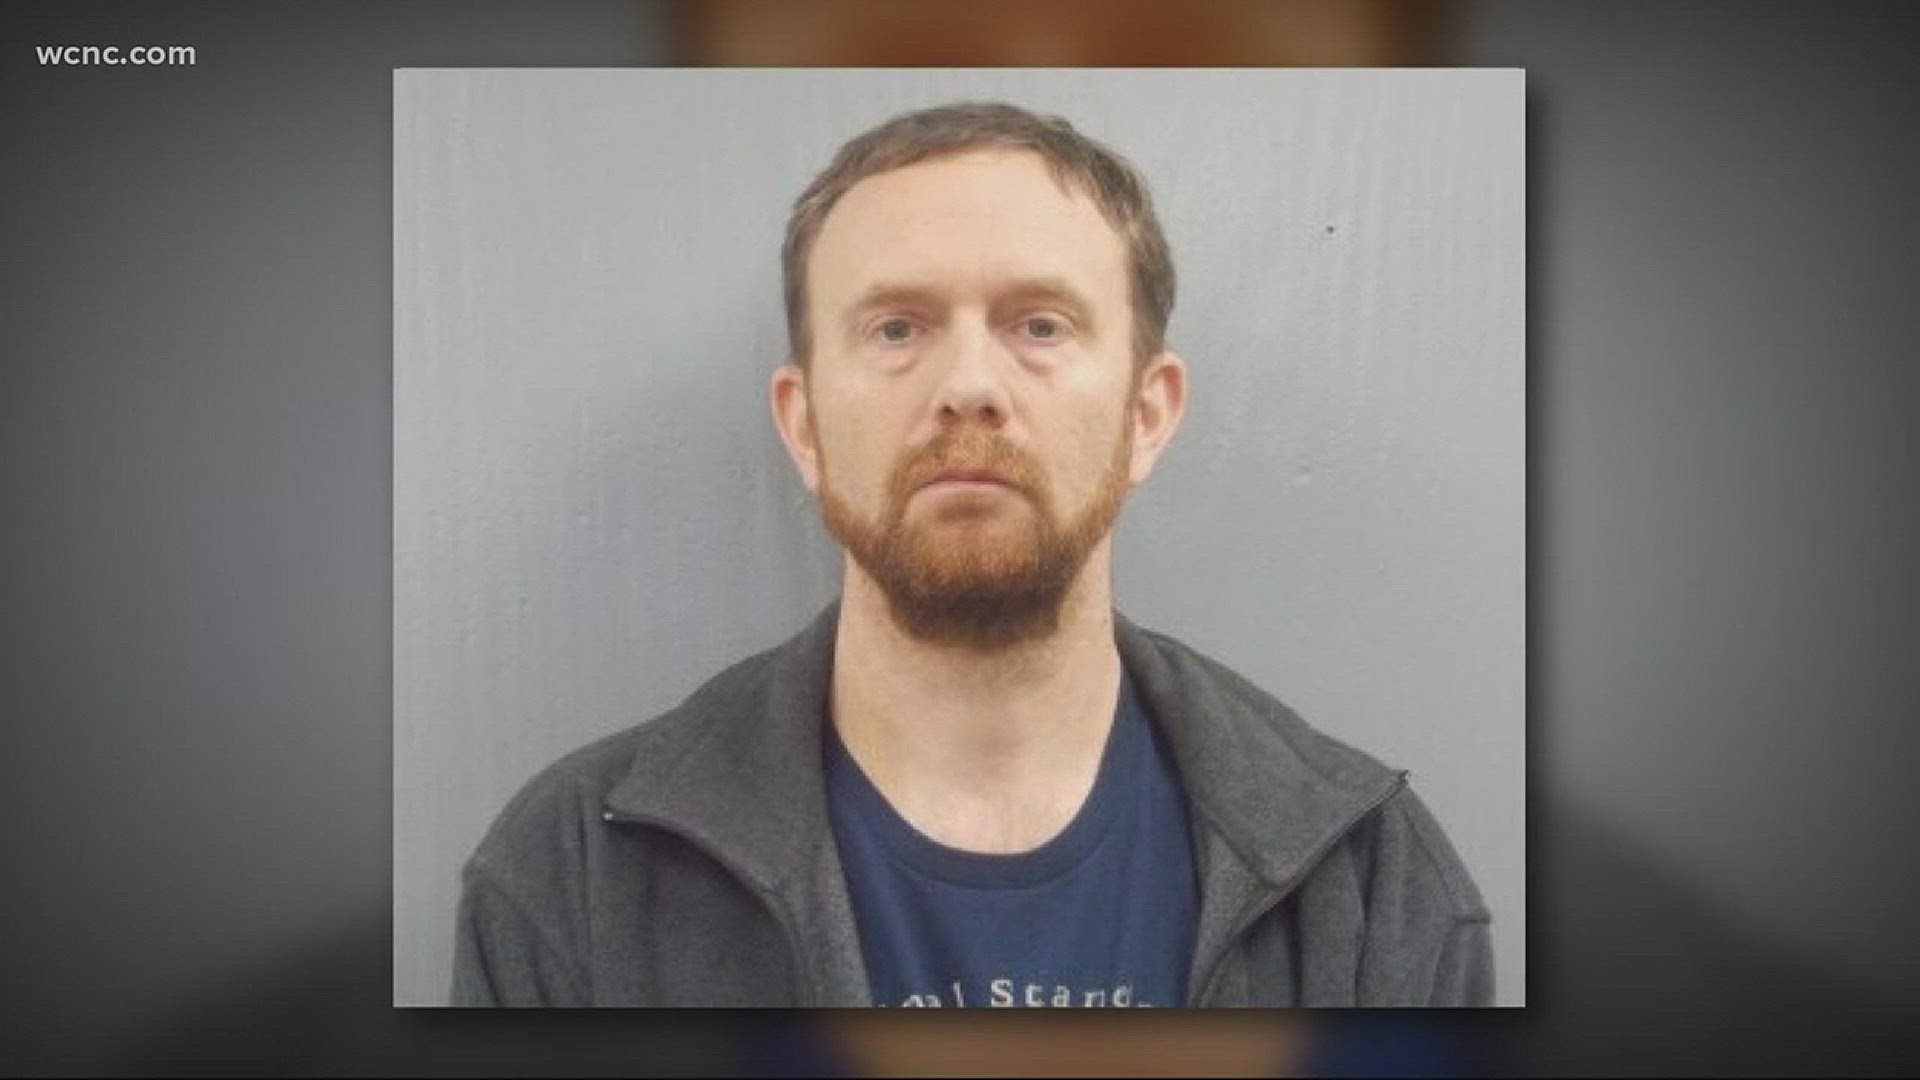 Former teacher arrested for sexual misconduct